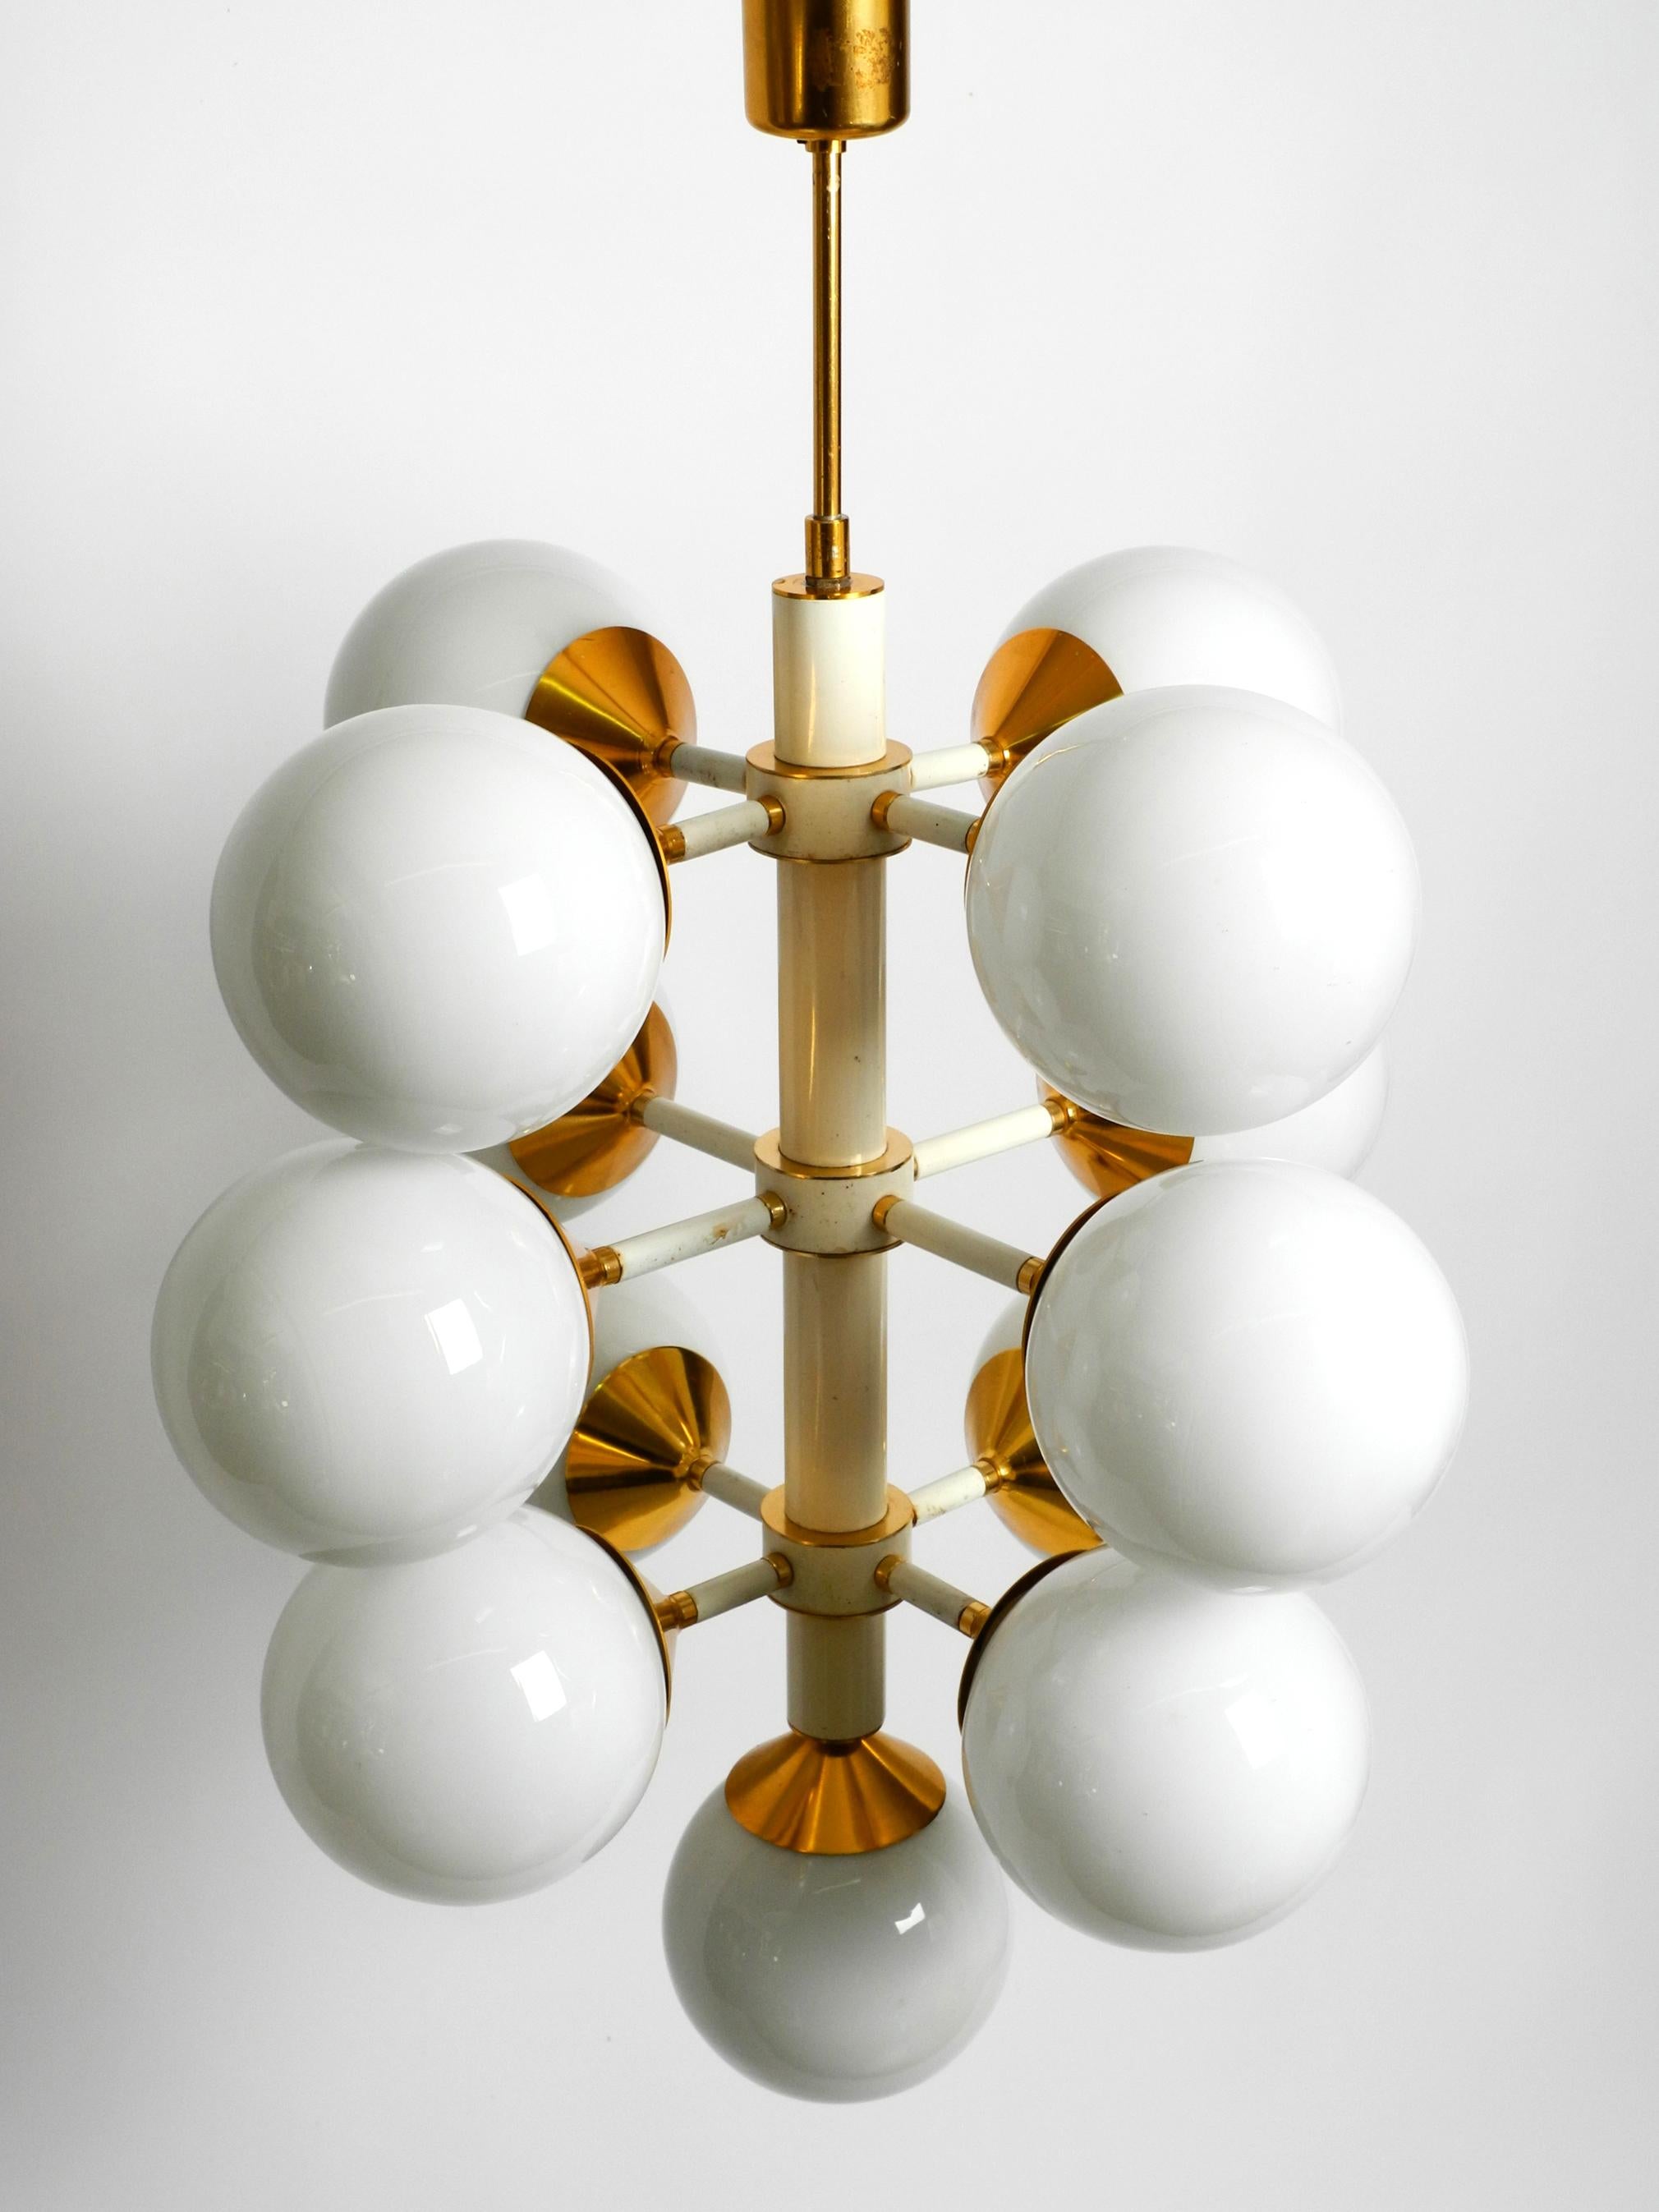 Rare Large 1960's Space Age Brass Ceiling Lamp with 13 White Glass Spheres For Sale 10